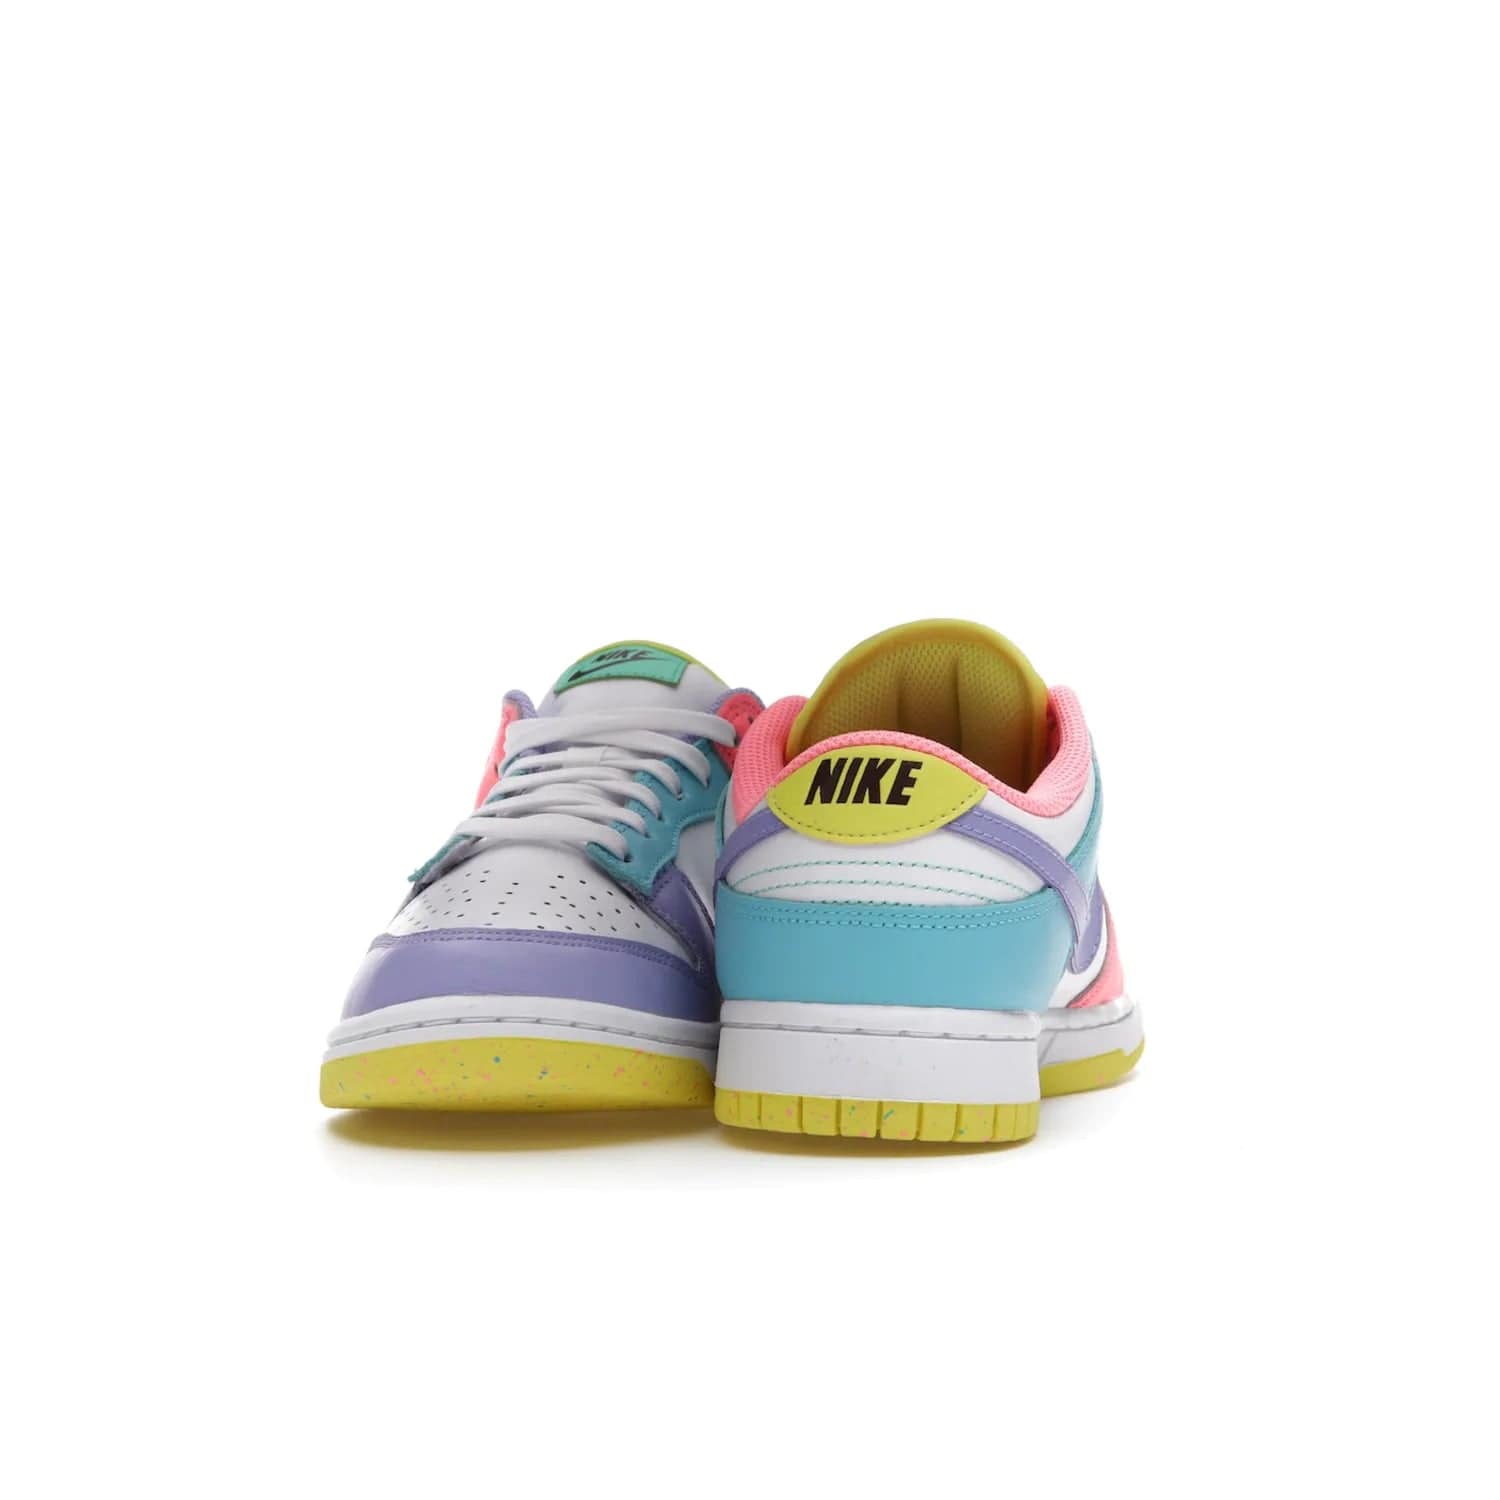 Nike Dunk Low SE Easter Candy (Women's) - Image 11 - Only at www.BallersClubKickz.com - UP
The Nike Dunk Low SE Easter Candy (Women's) brings a stylish touch to any outfit with its white leather upper, colorful accents, and multicolor speckle detailing. Shop now before they're gone.